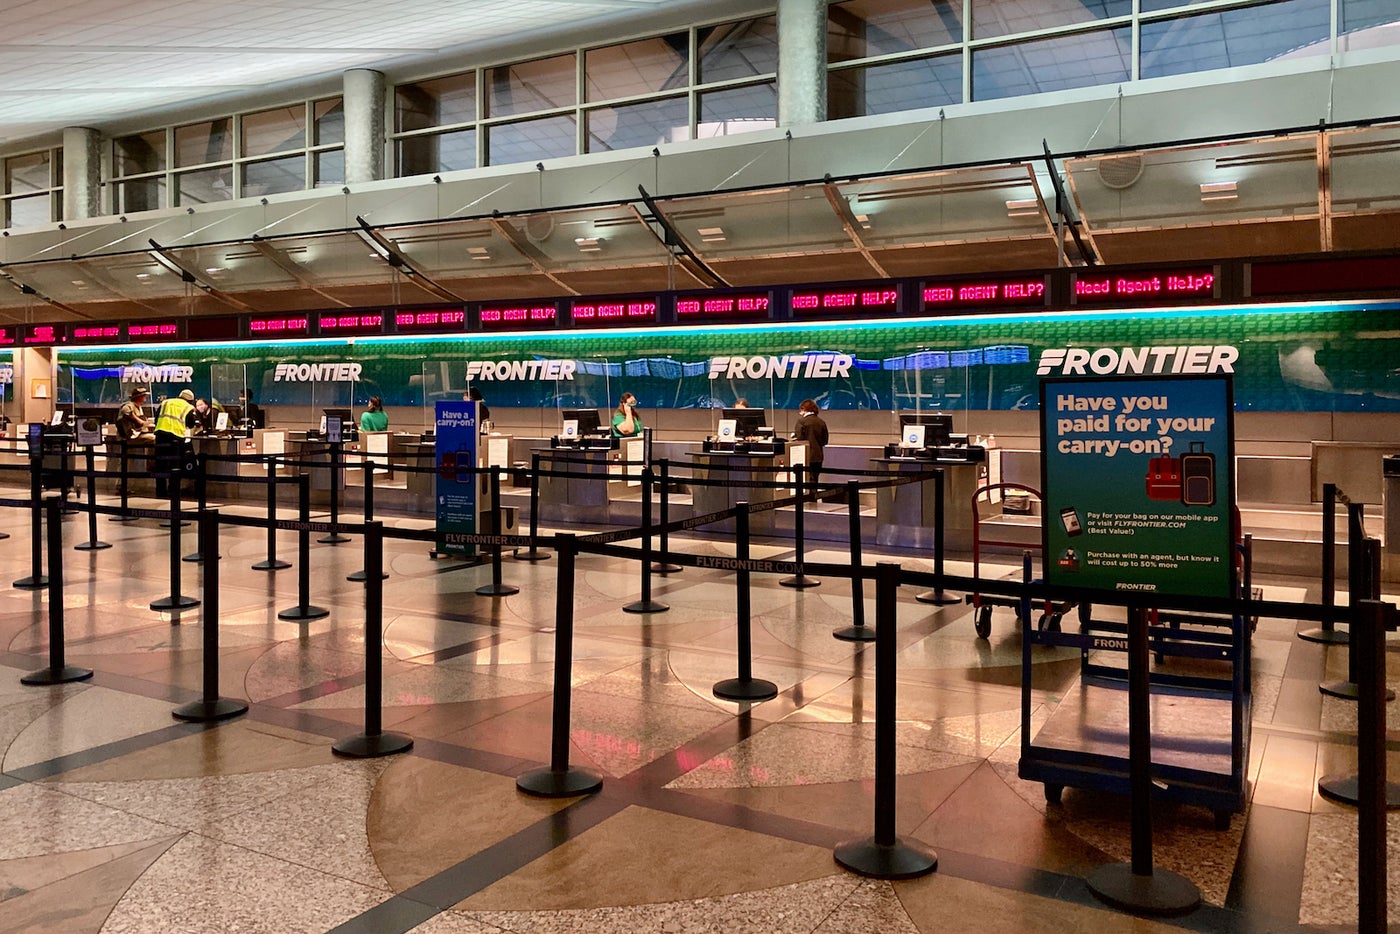 7 takeaways from my first Frontier Airlines flight in over 4 years